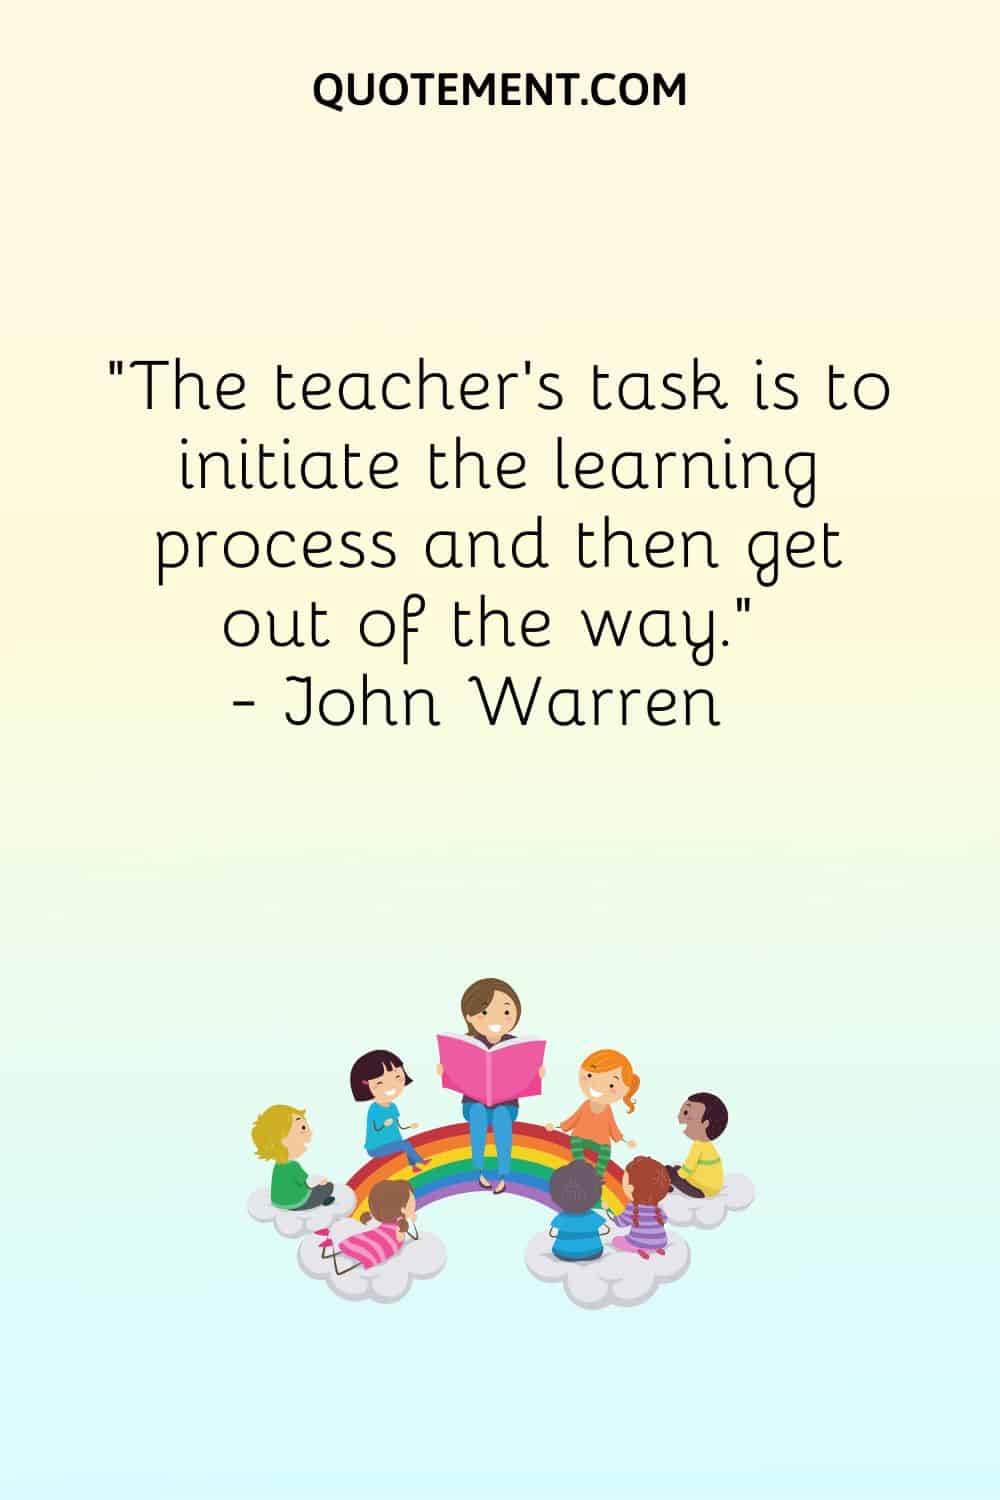 The teacher’s task is to initiate the learning process and then get out of the way.